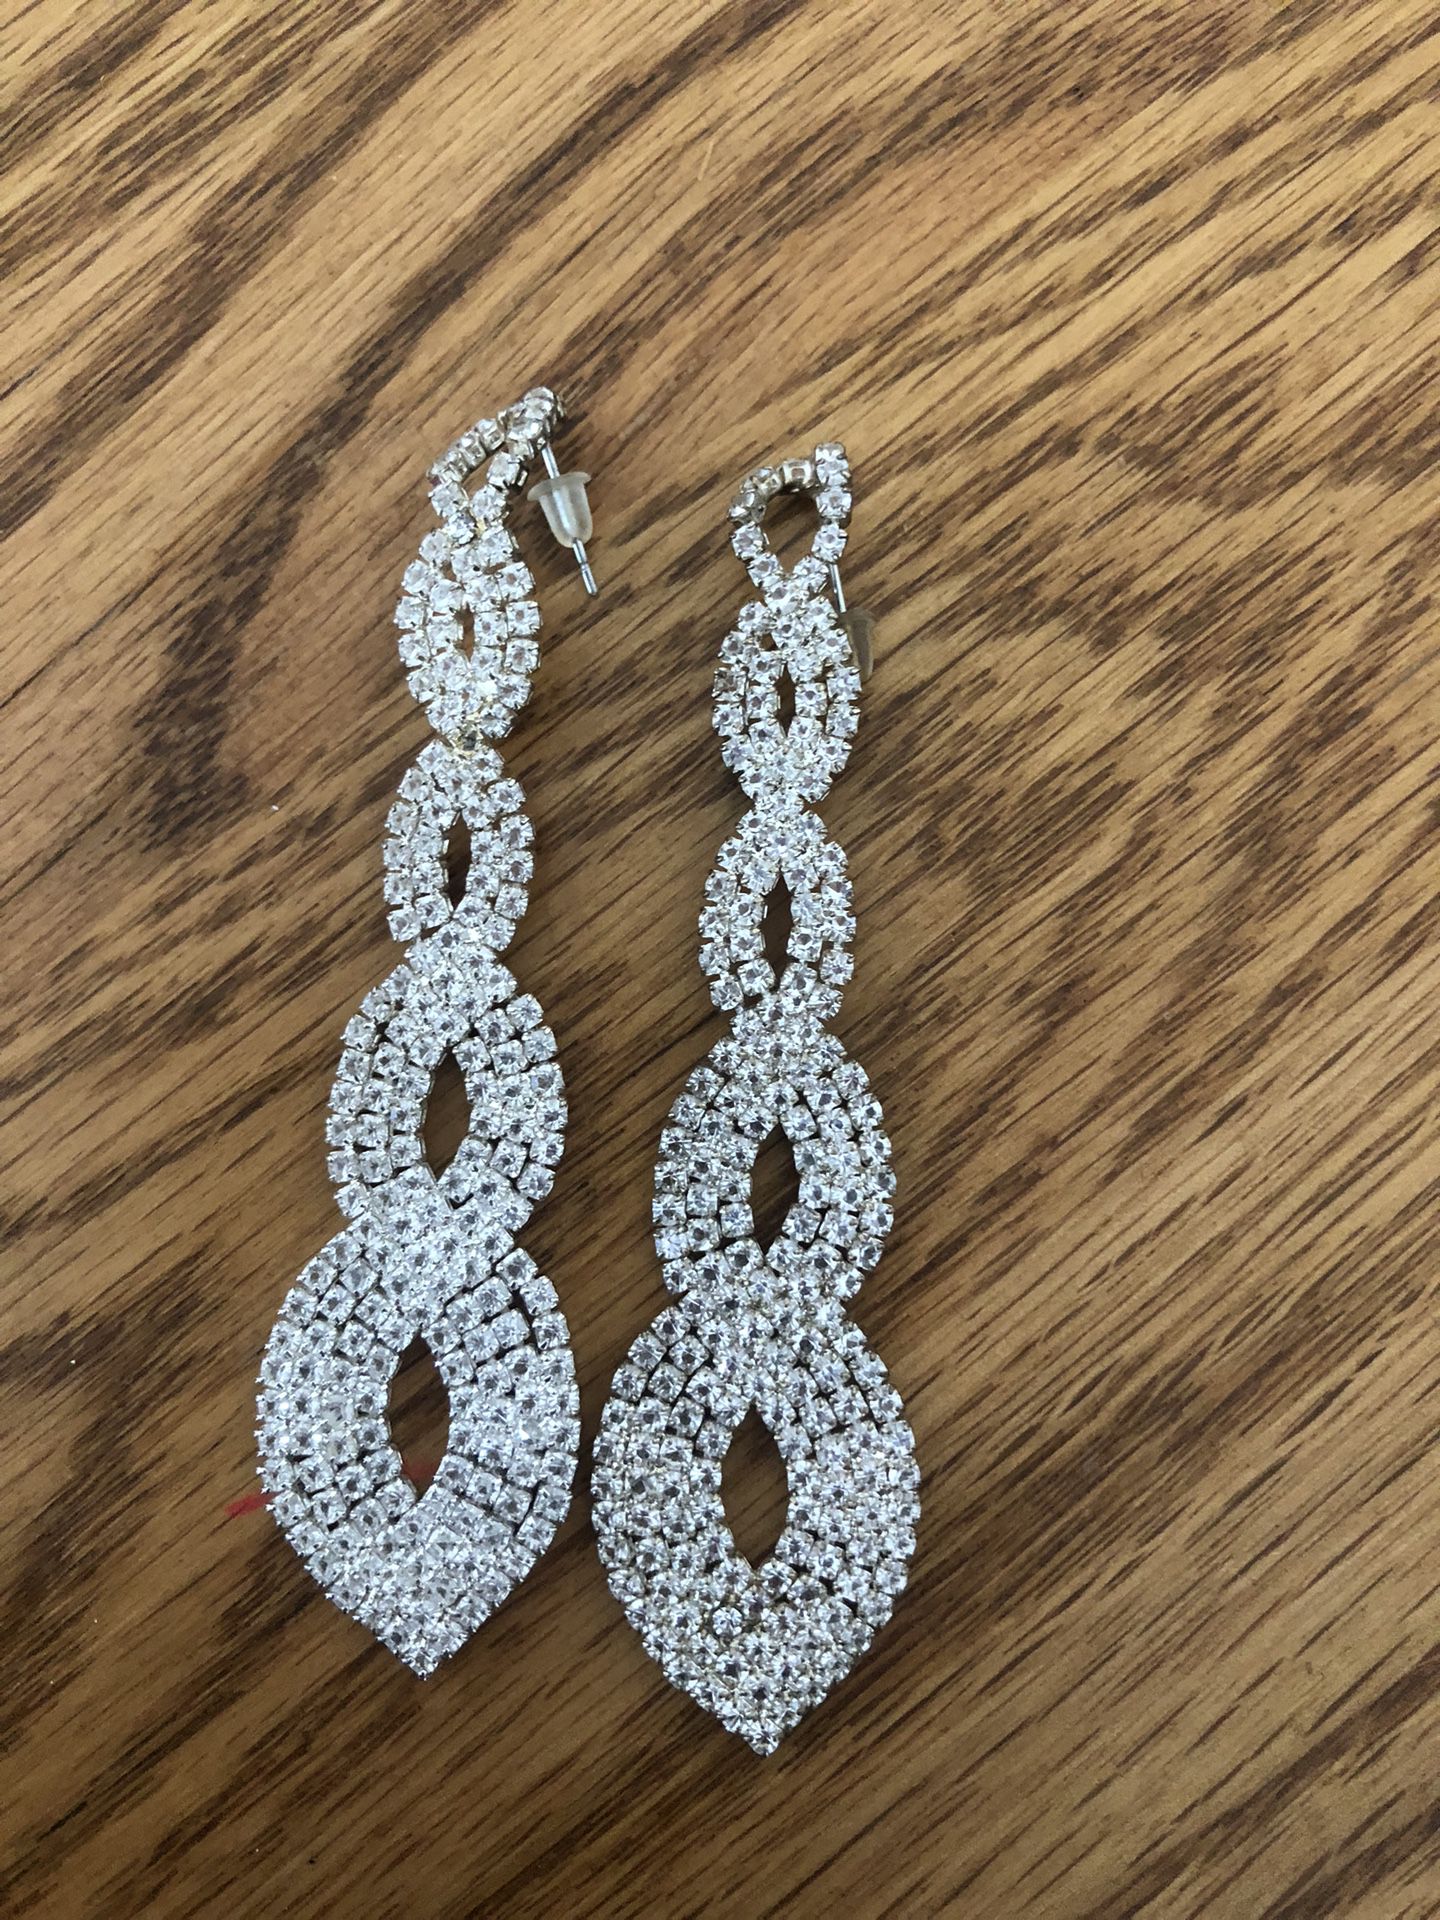 Two Pair Earring Lot 